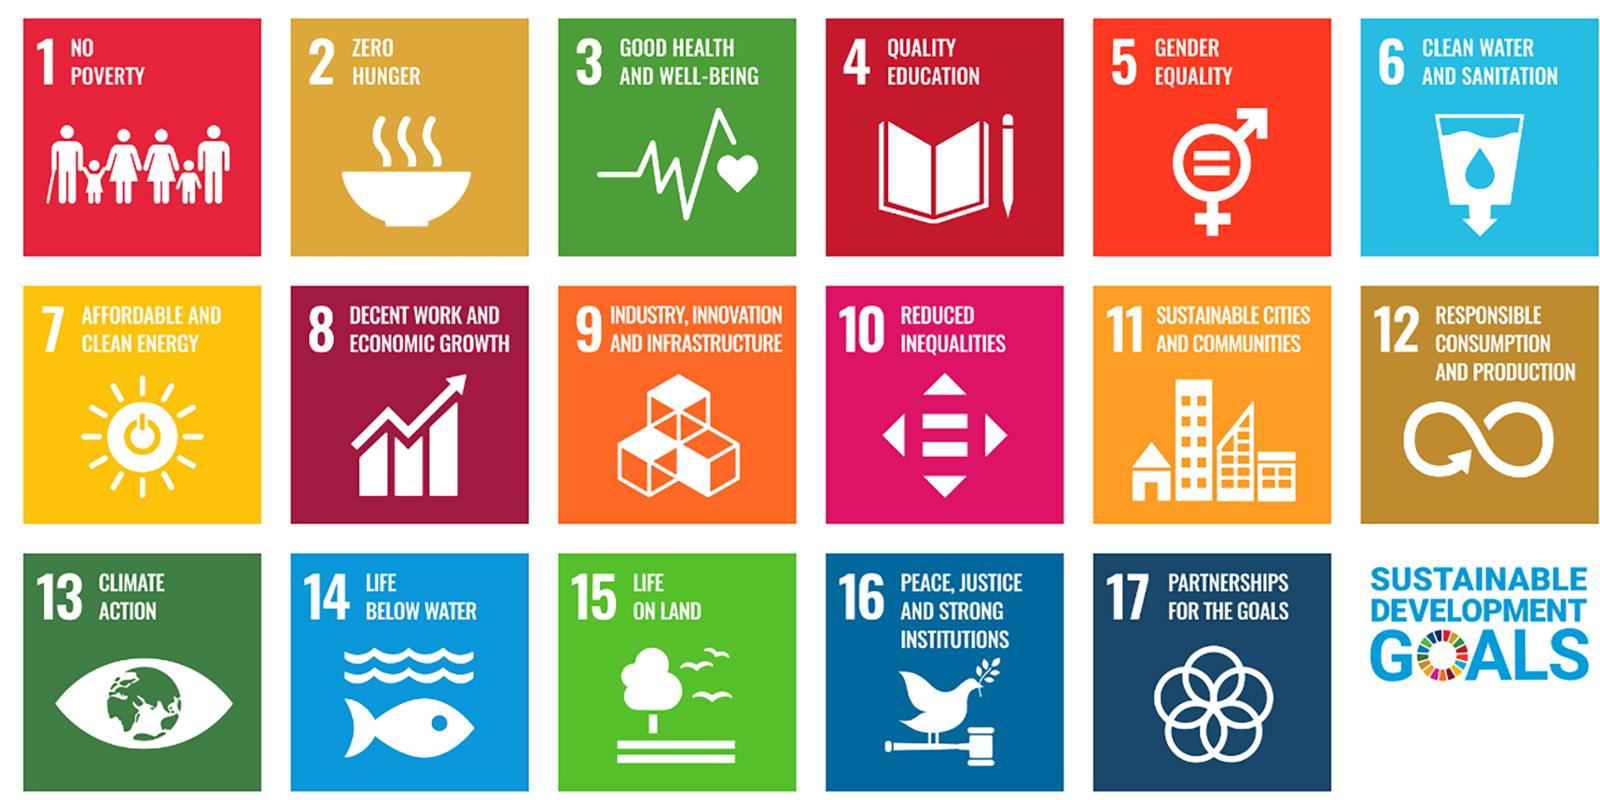 graphic showing the 17 Sustainable Development Goals (SDGs) adopted by all United Nations Member States in 2015.